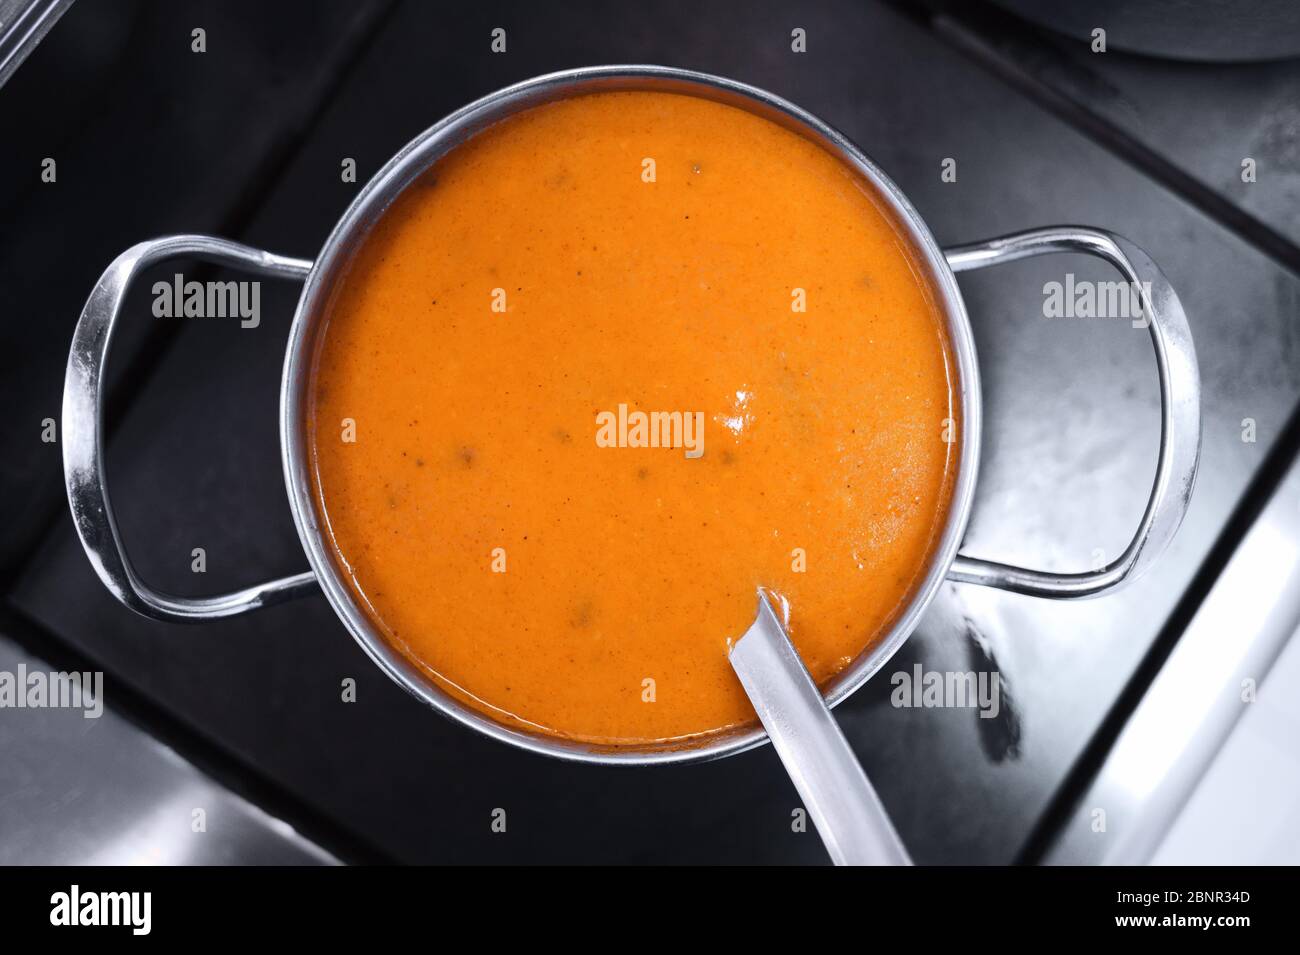 Yellow thick soup in a metal pot on the stove. Style and minimalism in the kitchen design. Stock Photo